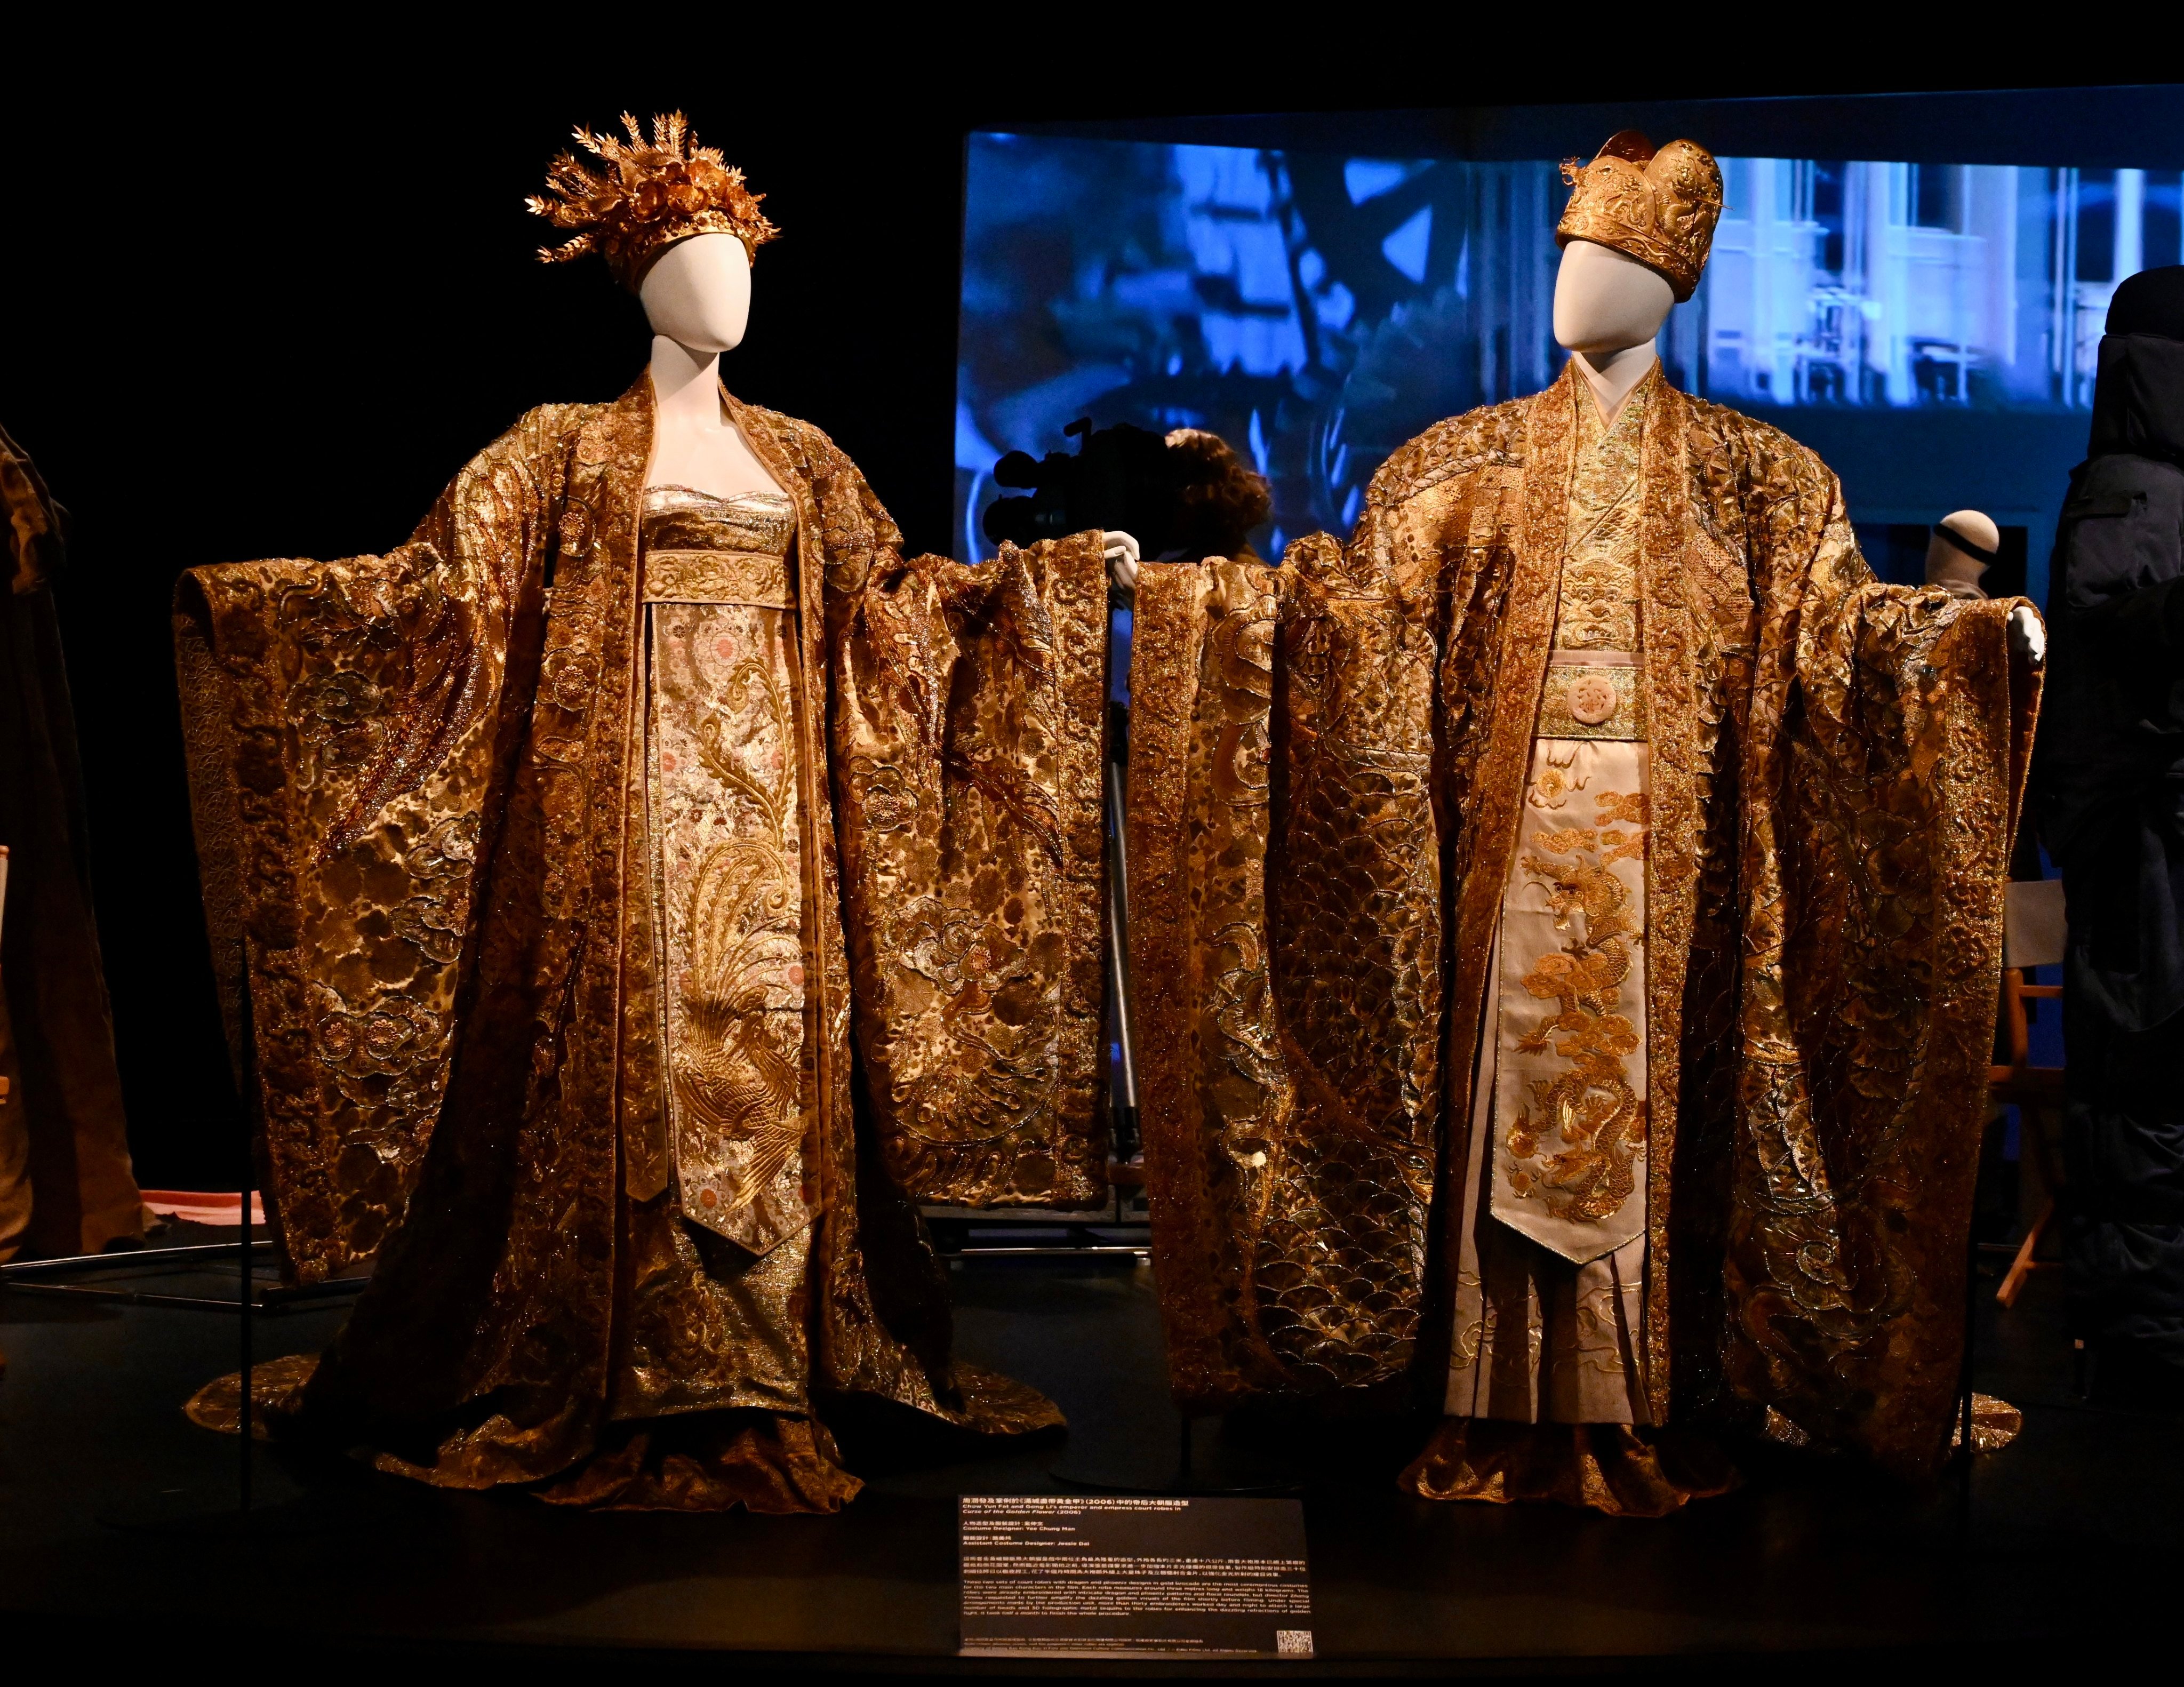 Gong Li and Chow Yun-fat’s court robes, by costume designer Yee Chung-man, from Curse of the Golden Flower (2006) at “Out of Thin Air: Hong Kong Film Arts & Costumes Exhibition”, a major exhibition at the Hong Kong Heritage Museum. Photo: Hong Kong Heritage Museum